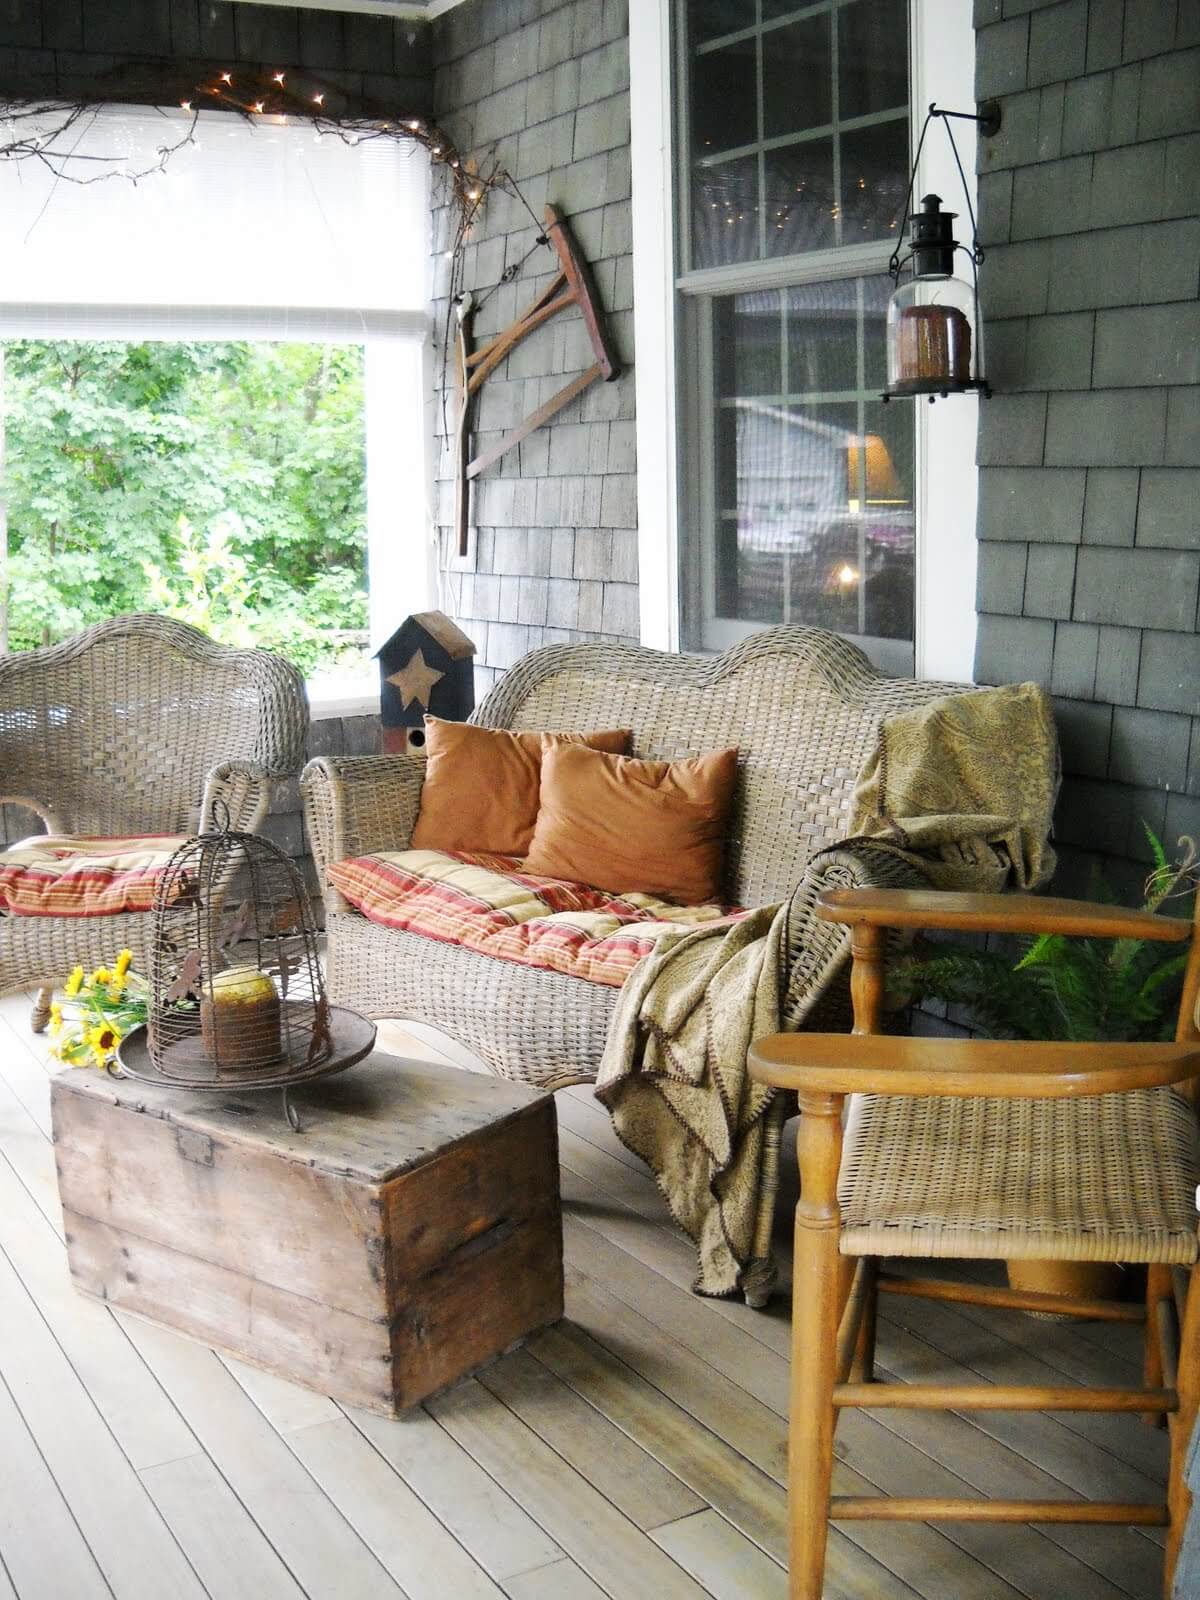 Vintage Finds Perfect For Rustic Styling